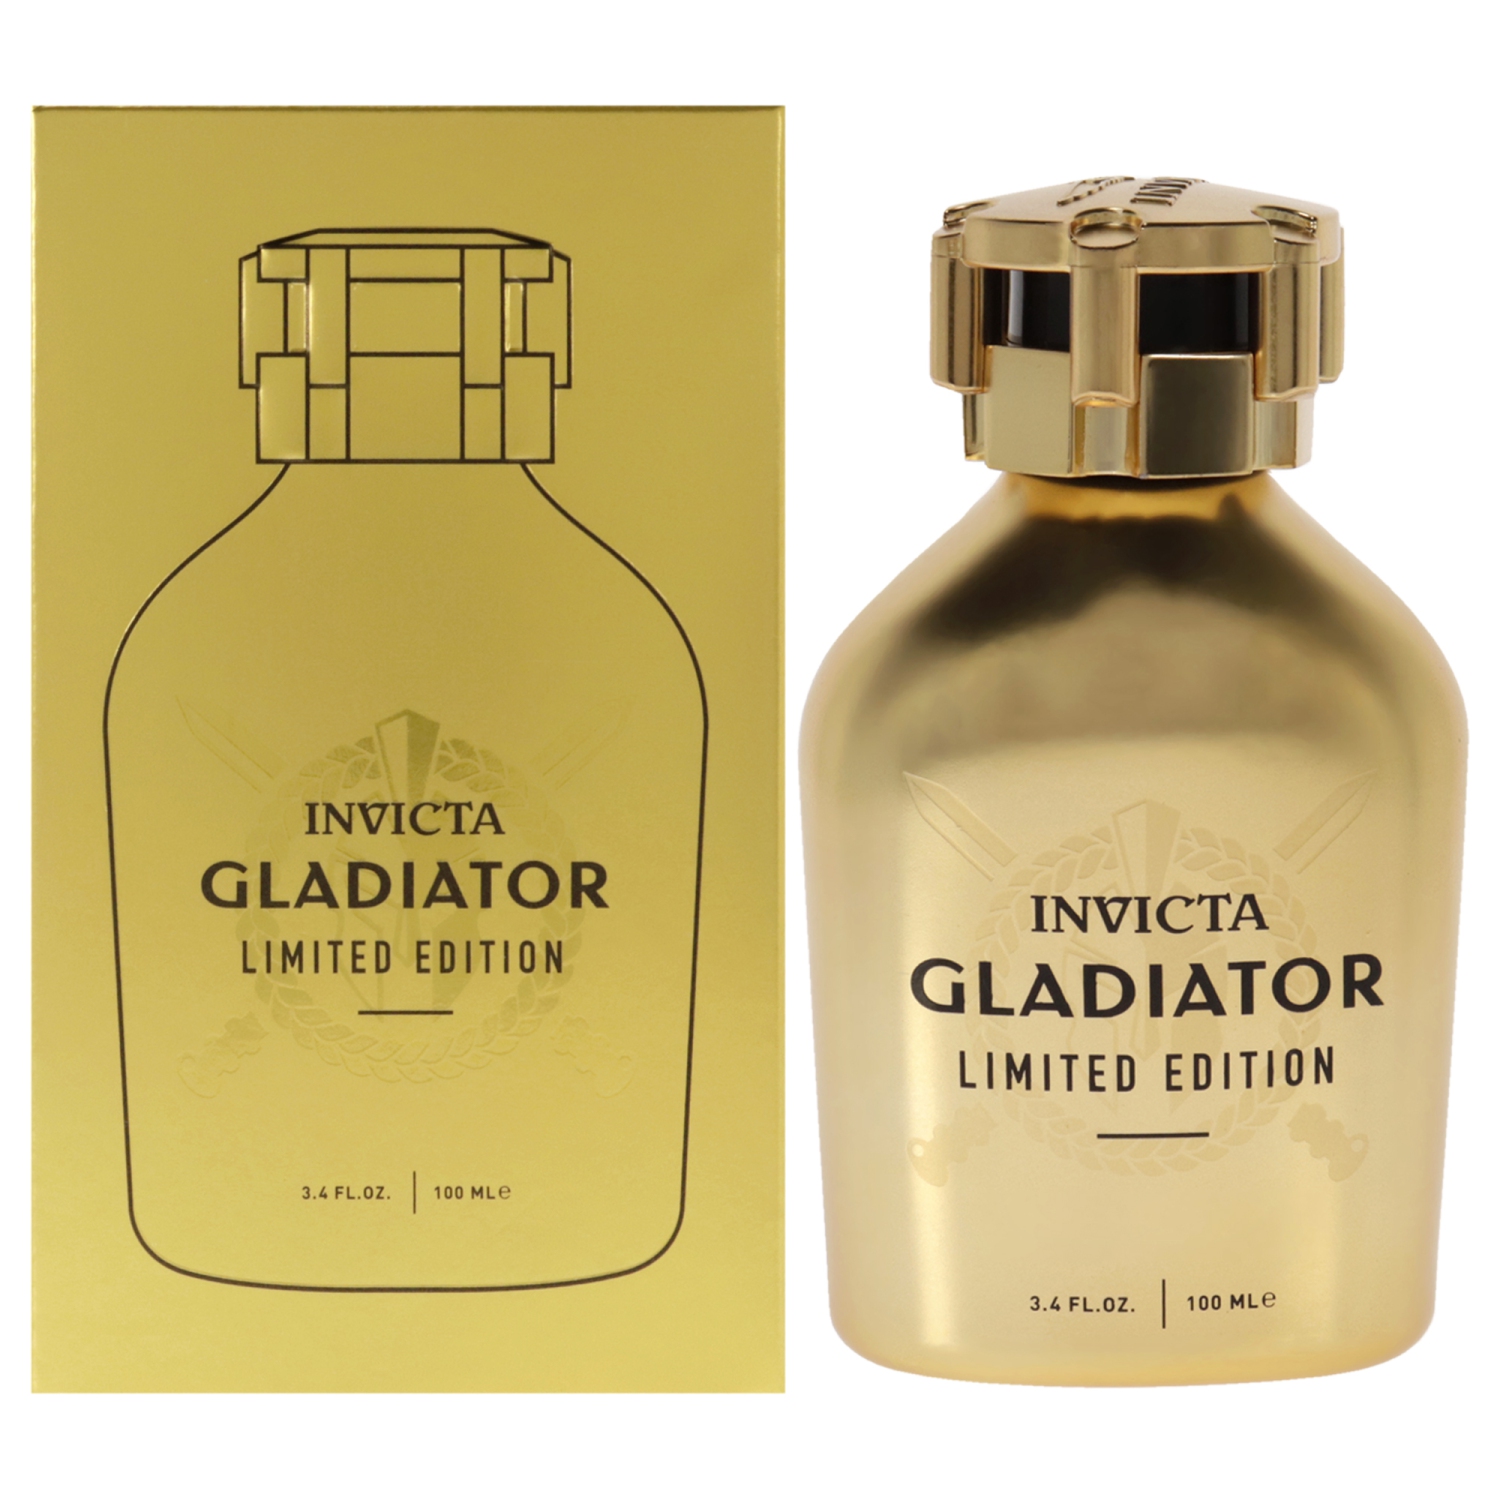 Gladiator by Invicta for Men - 3.4 oz EDP Spray (Limited Edition)